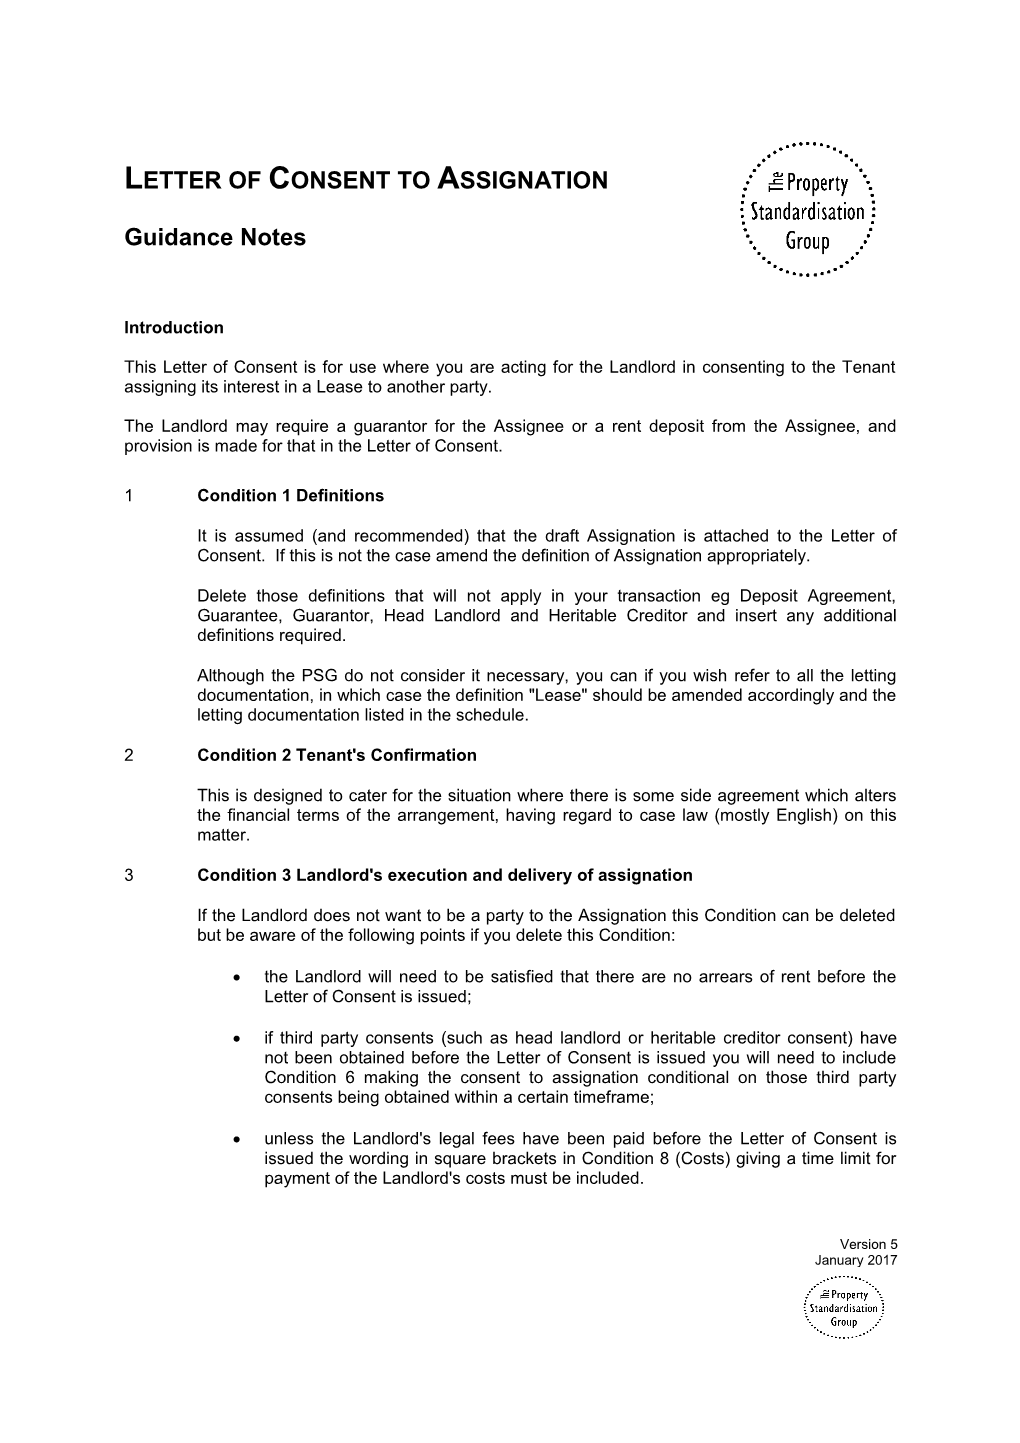 AS(W5)Letter of Consent Guidance Notes